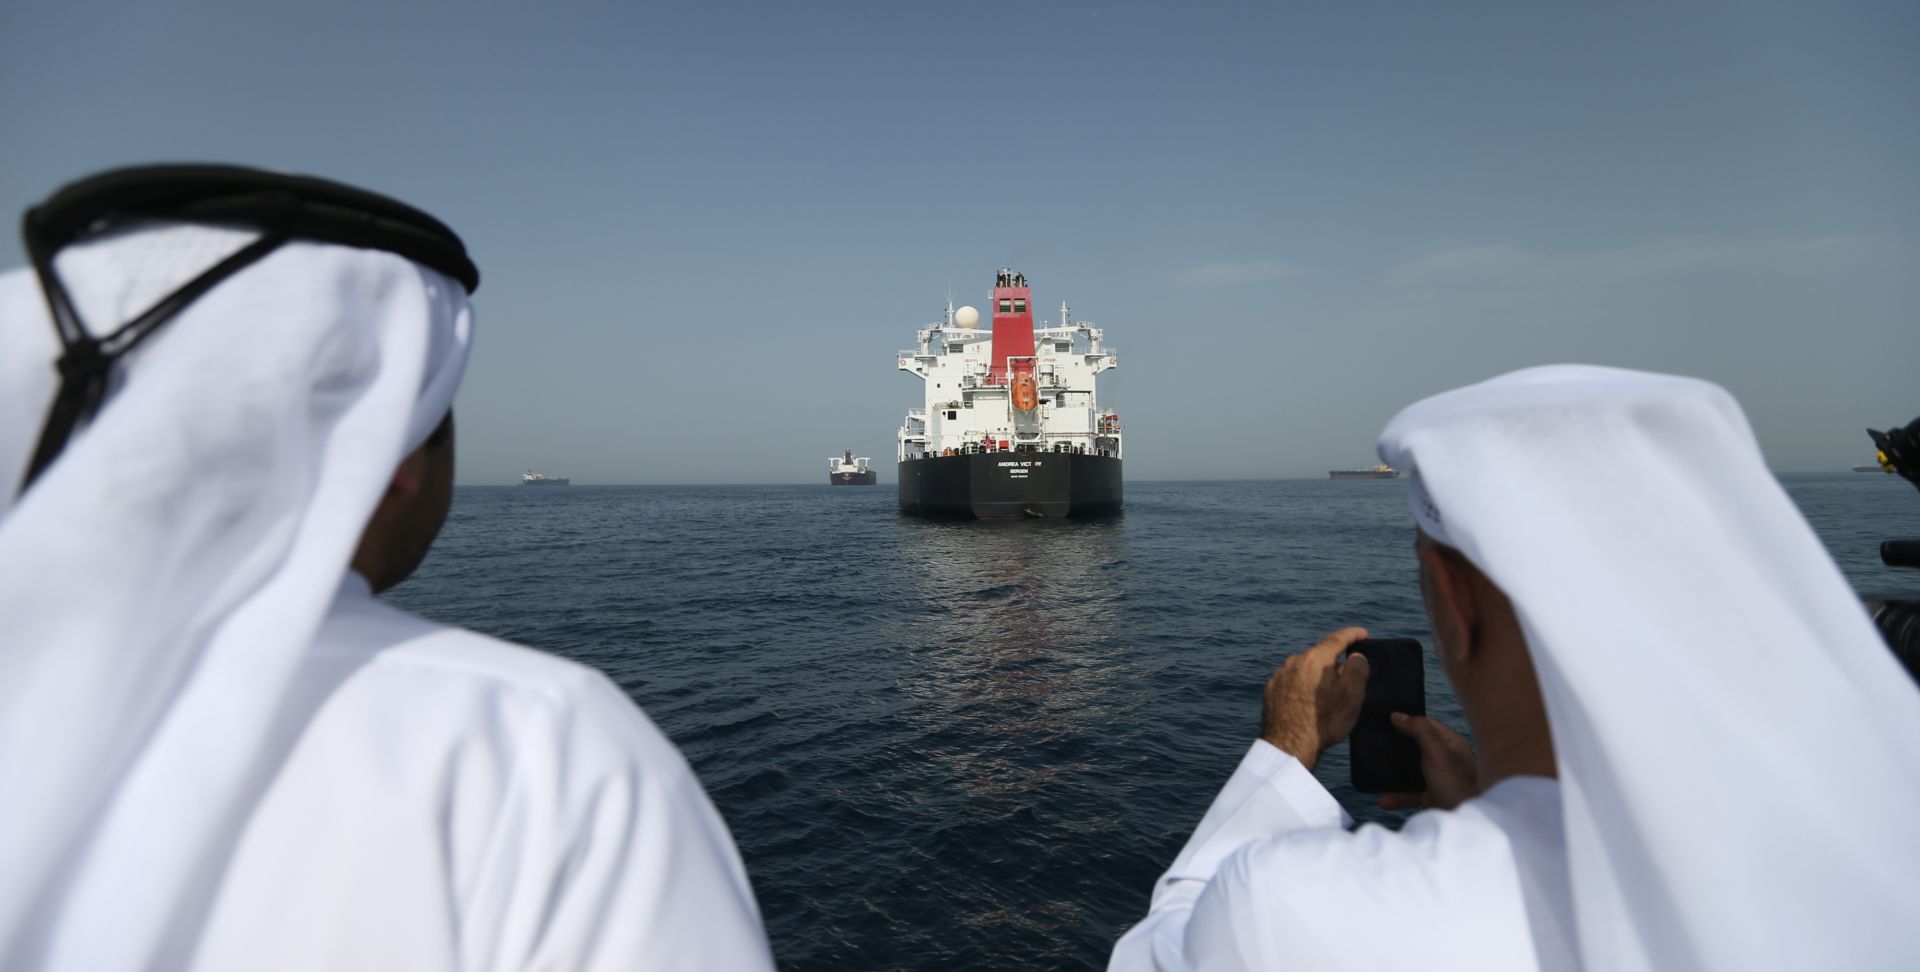 epa07567791 A general view for the MV Andrea Victory under Norway flag which was attacked on 12 May 2019 outside Fujairah port, United Arab Emirates, 13 May 2019. Media reports on 13 May 2019 state that the United Arab Emirates (UAE) Foreign Office reported that four commercial vessels have been targeted by sabotage operations near UAE territorial waters. Saudi Arabia's energy minister Khalid al-Falih added that two Saudi oil tankers had been targeted in the attack.  EPA/ALI HAIDER